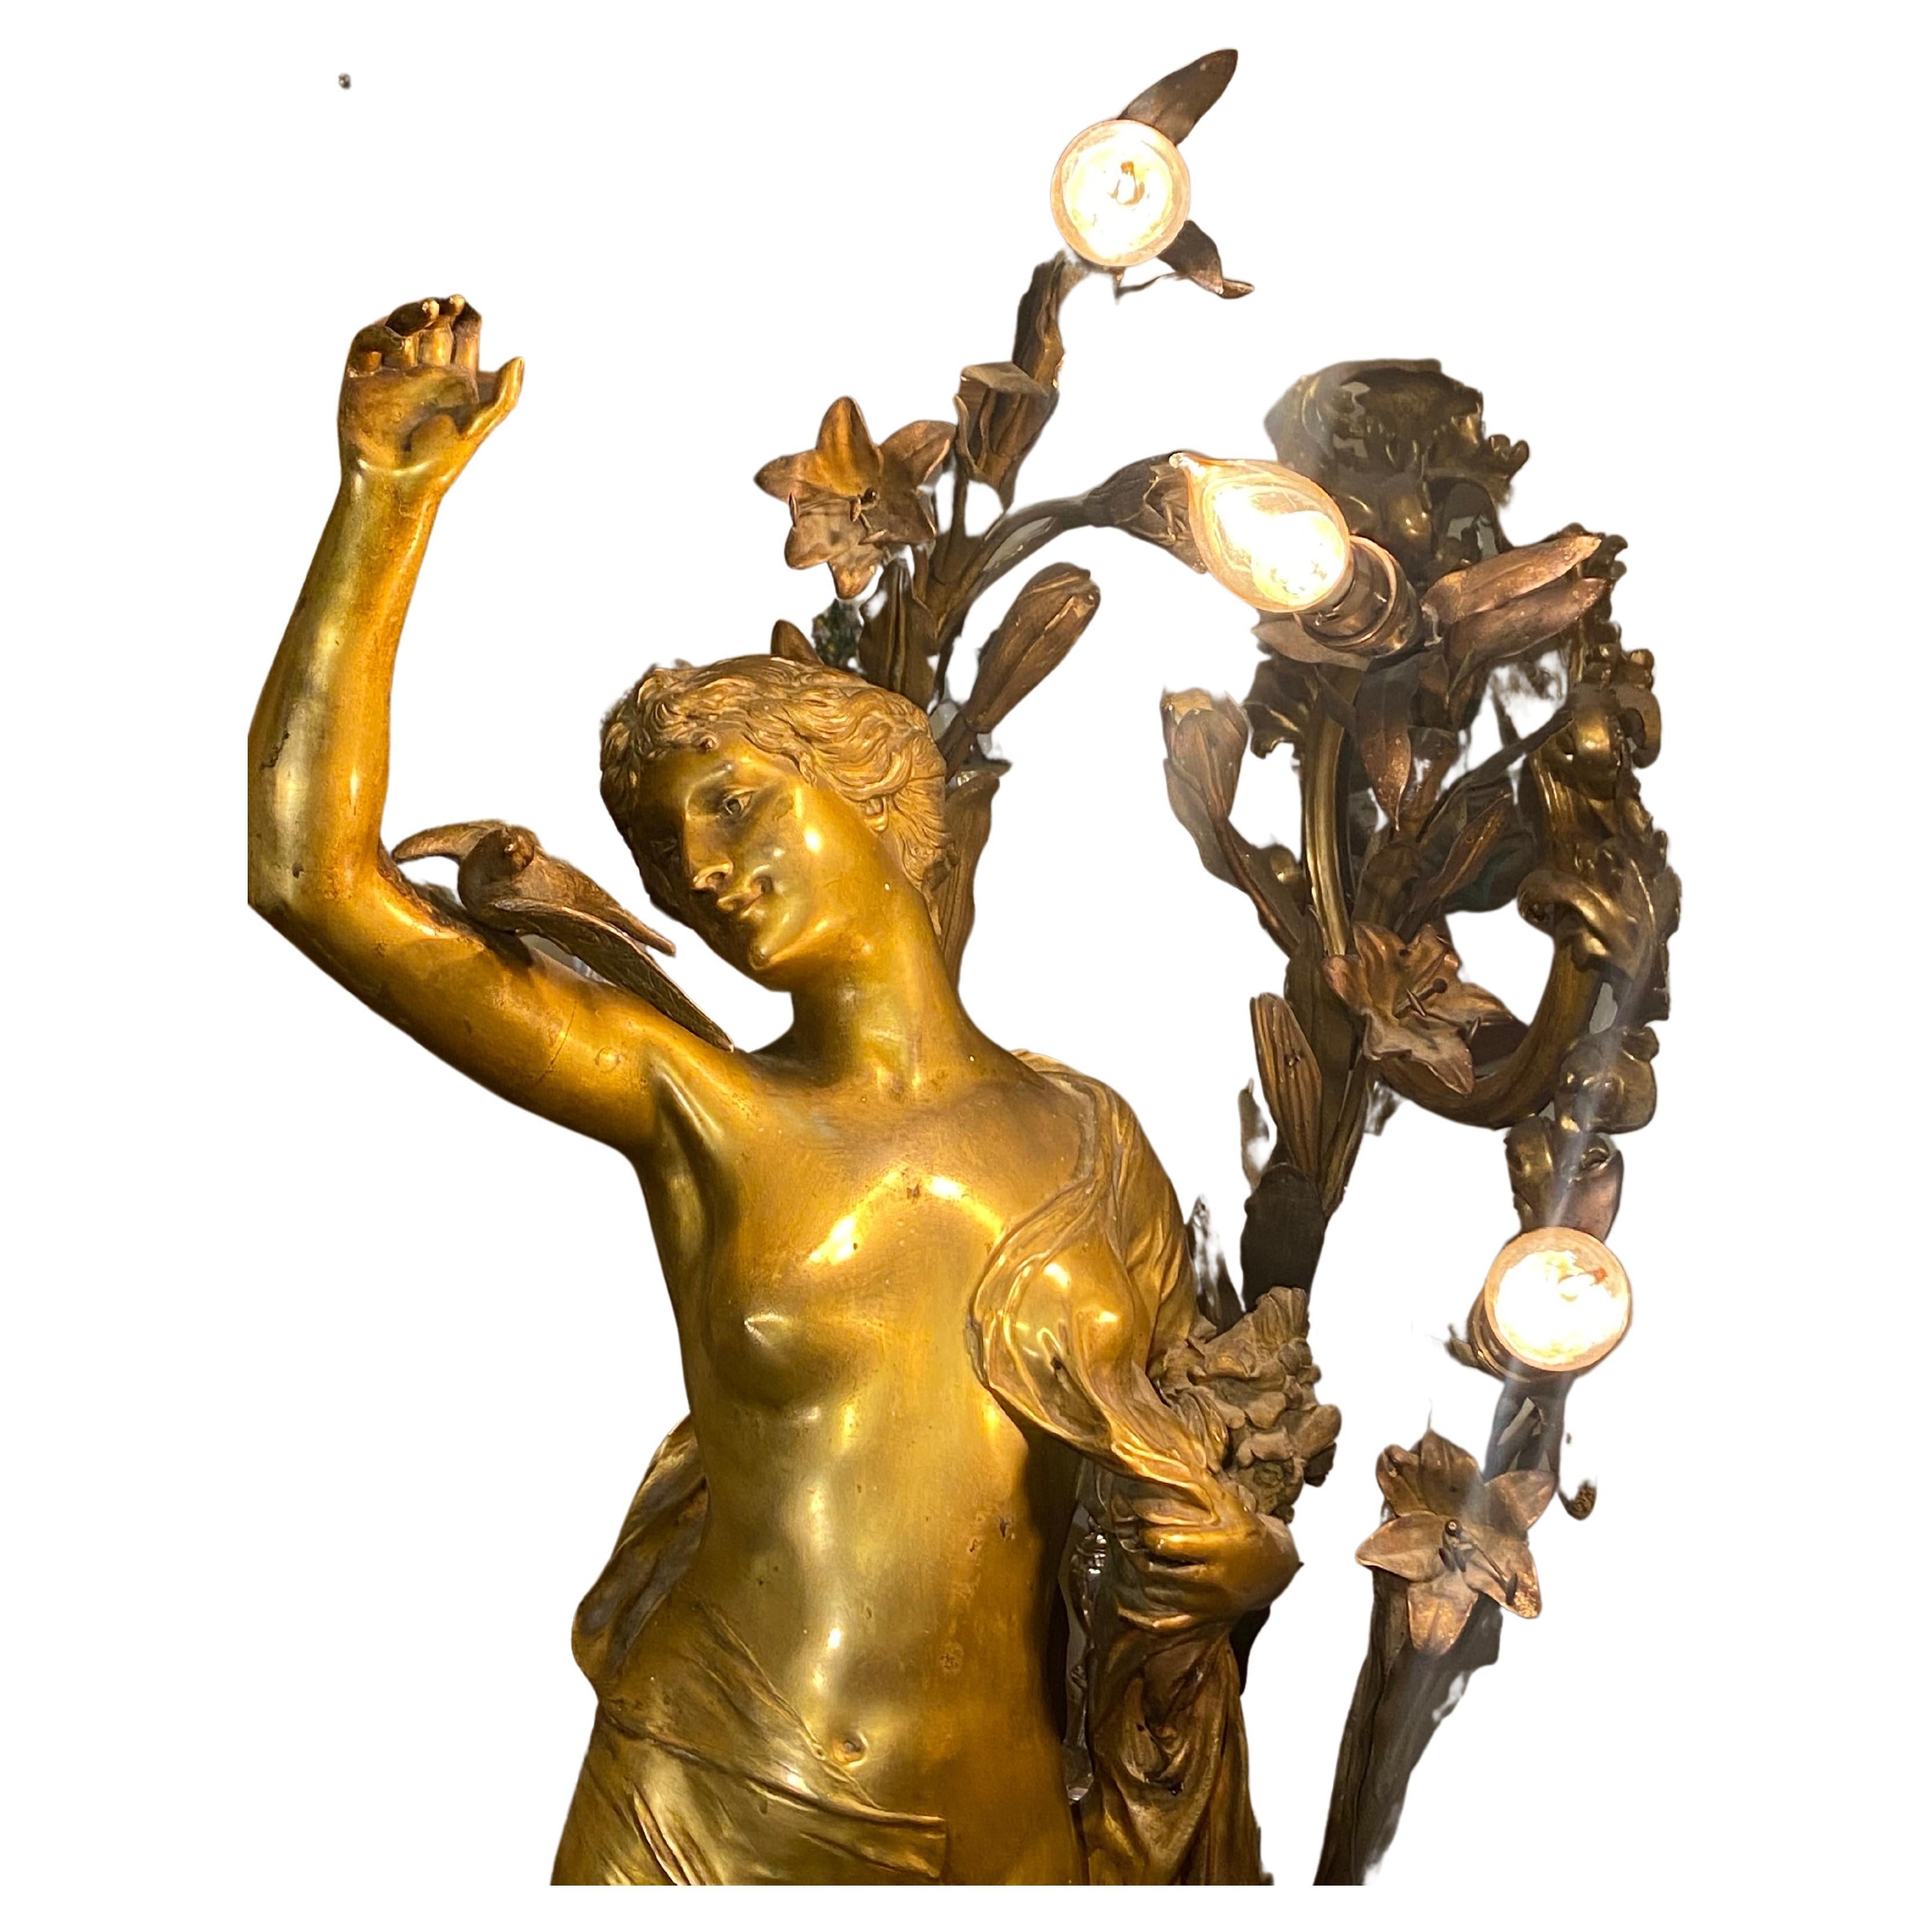 A superb stunning and very large Art Nouveau Gilt Bronze Dore figural lamp of a lady with flora and foliage decoration and with three branch light fittings.
Circa 1900. Signed Henri Ple and stamped Millet a Paris.
A beautiful piece in good